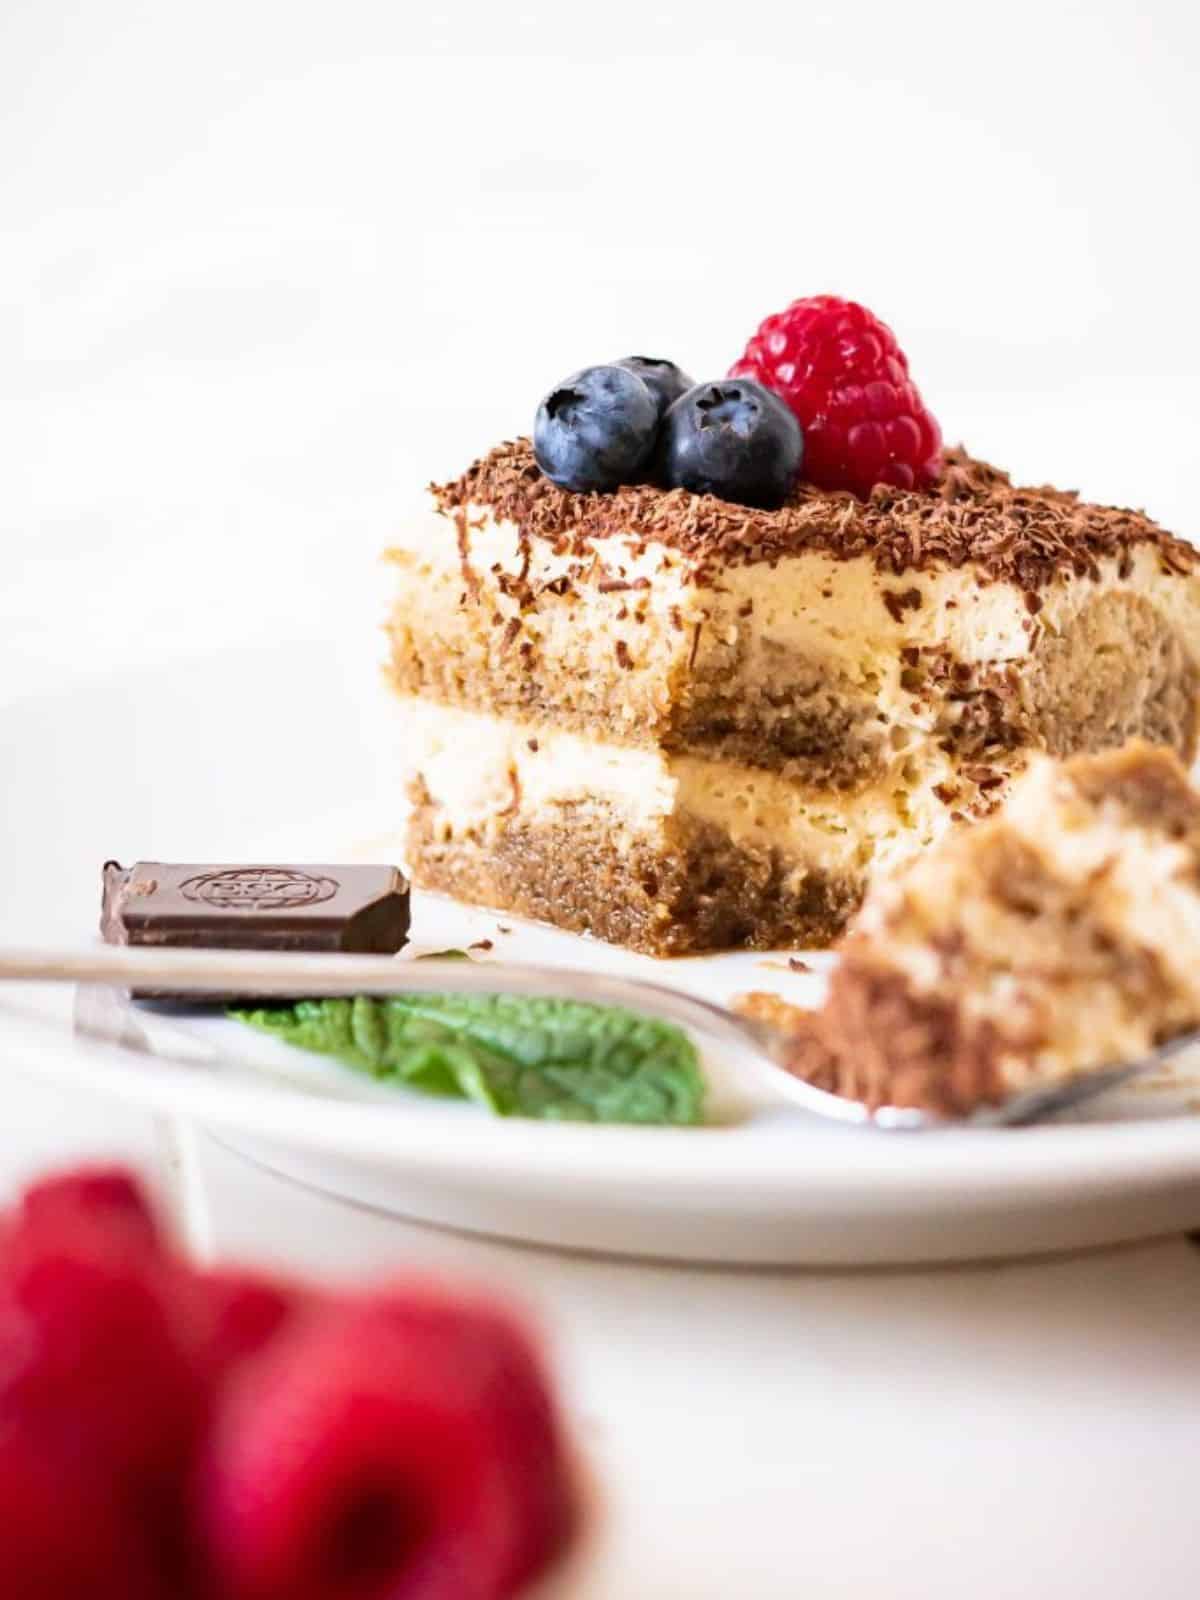 dairy-free tiramisu with layers of creamy mascarpone filling and coffee dipped ladyfingers, topped with fresh berries and shaved dairy-free chocolate.